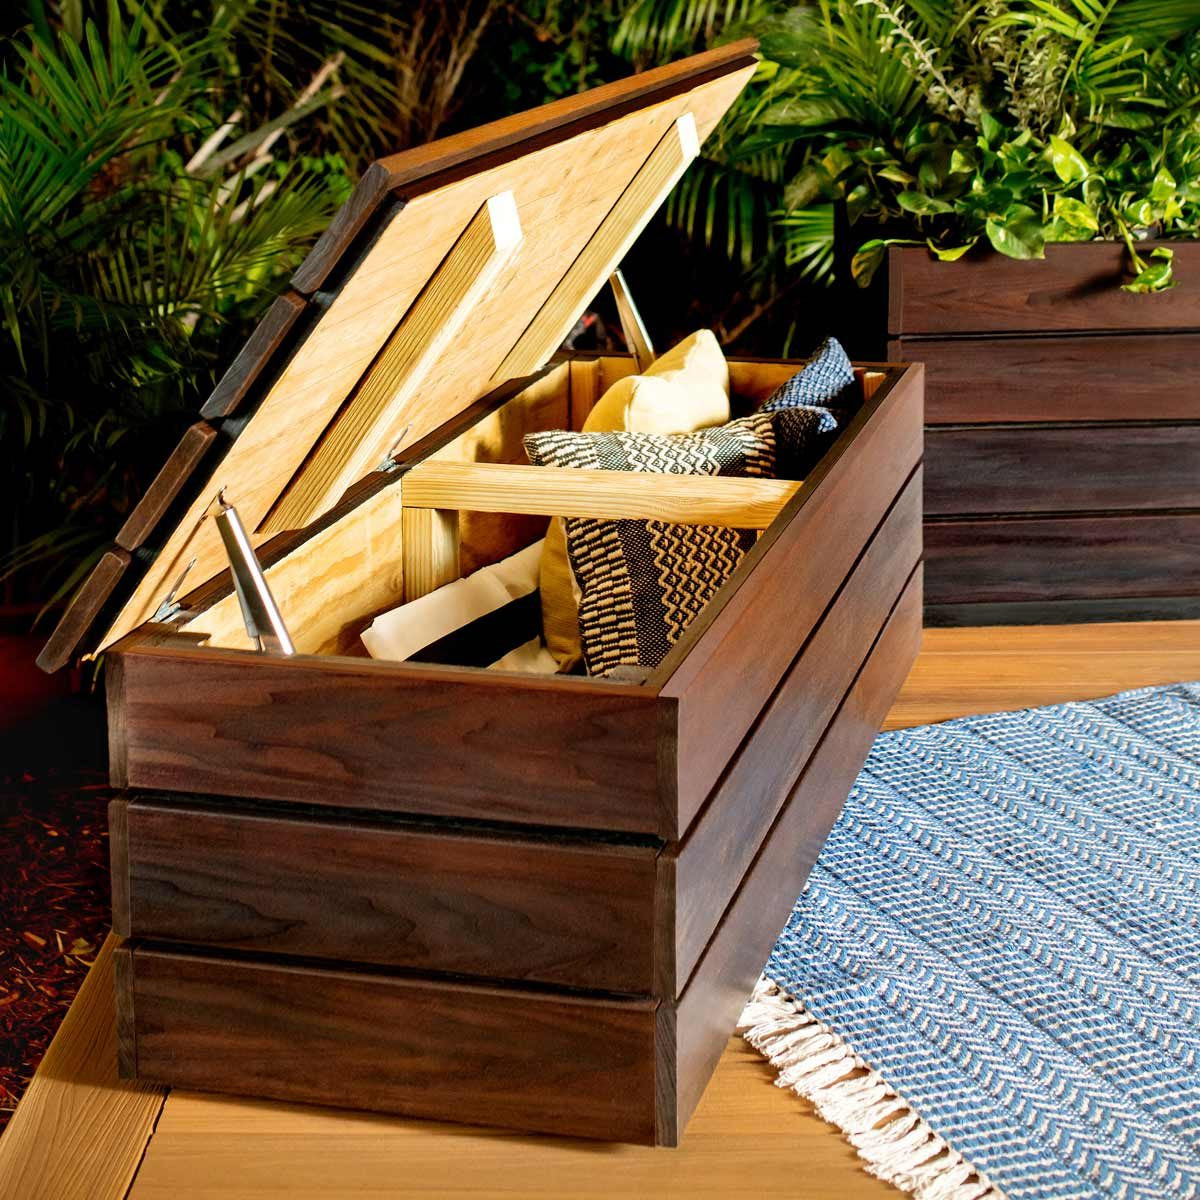 Storage Bench For Deck
 How to Build an Outdoor Storage Bench